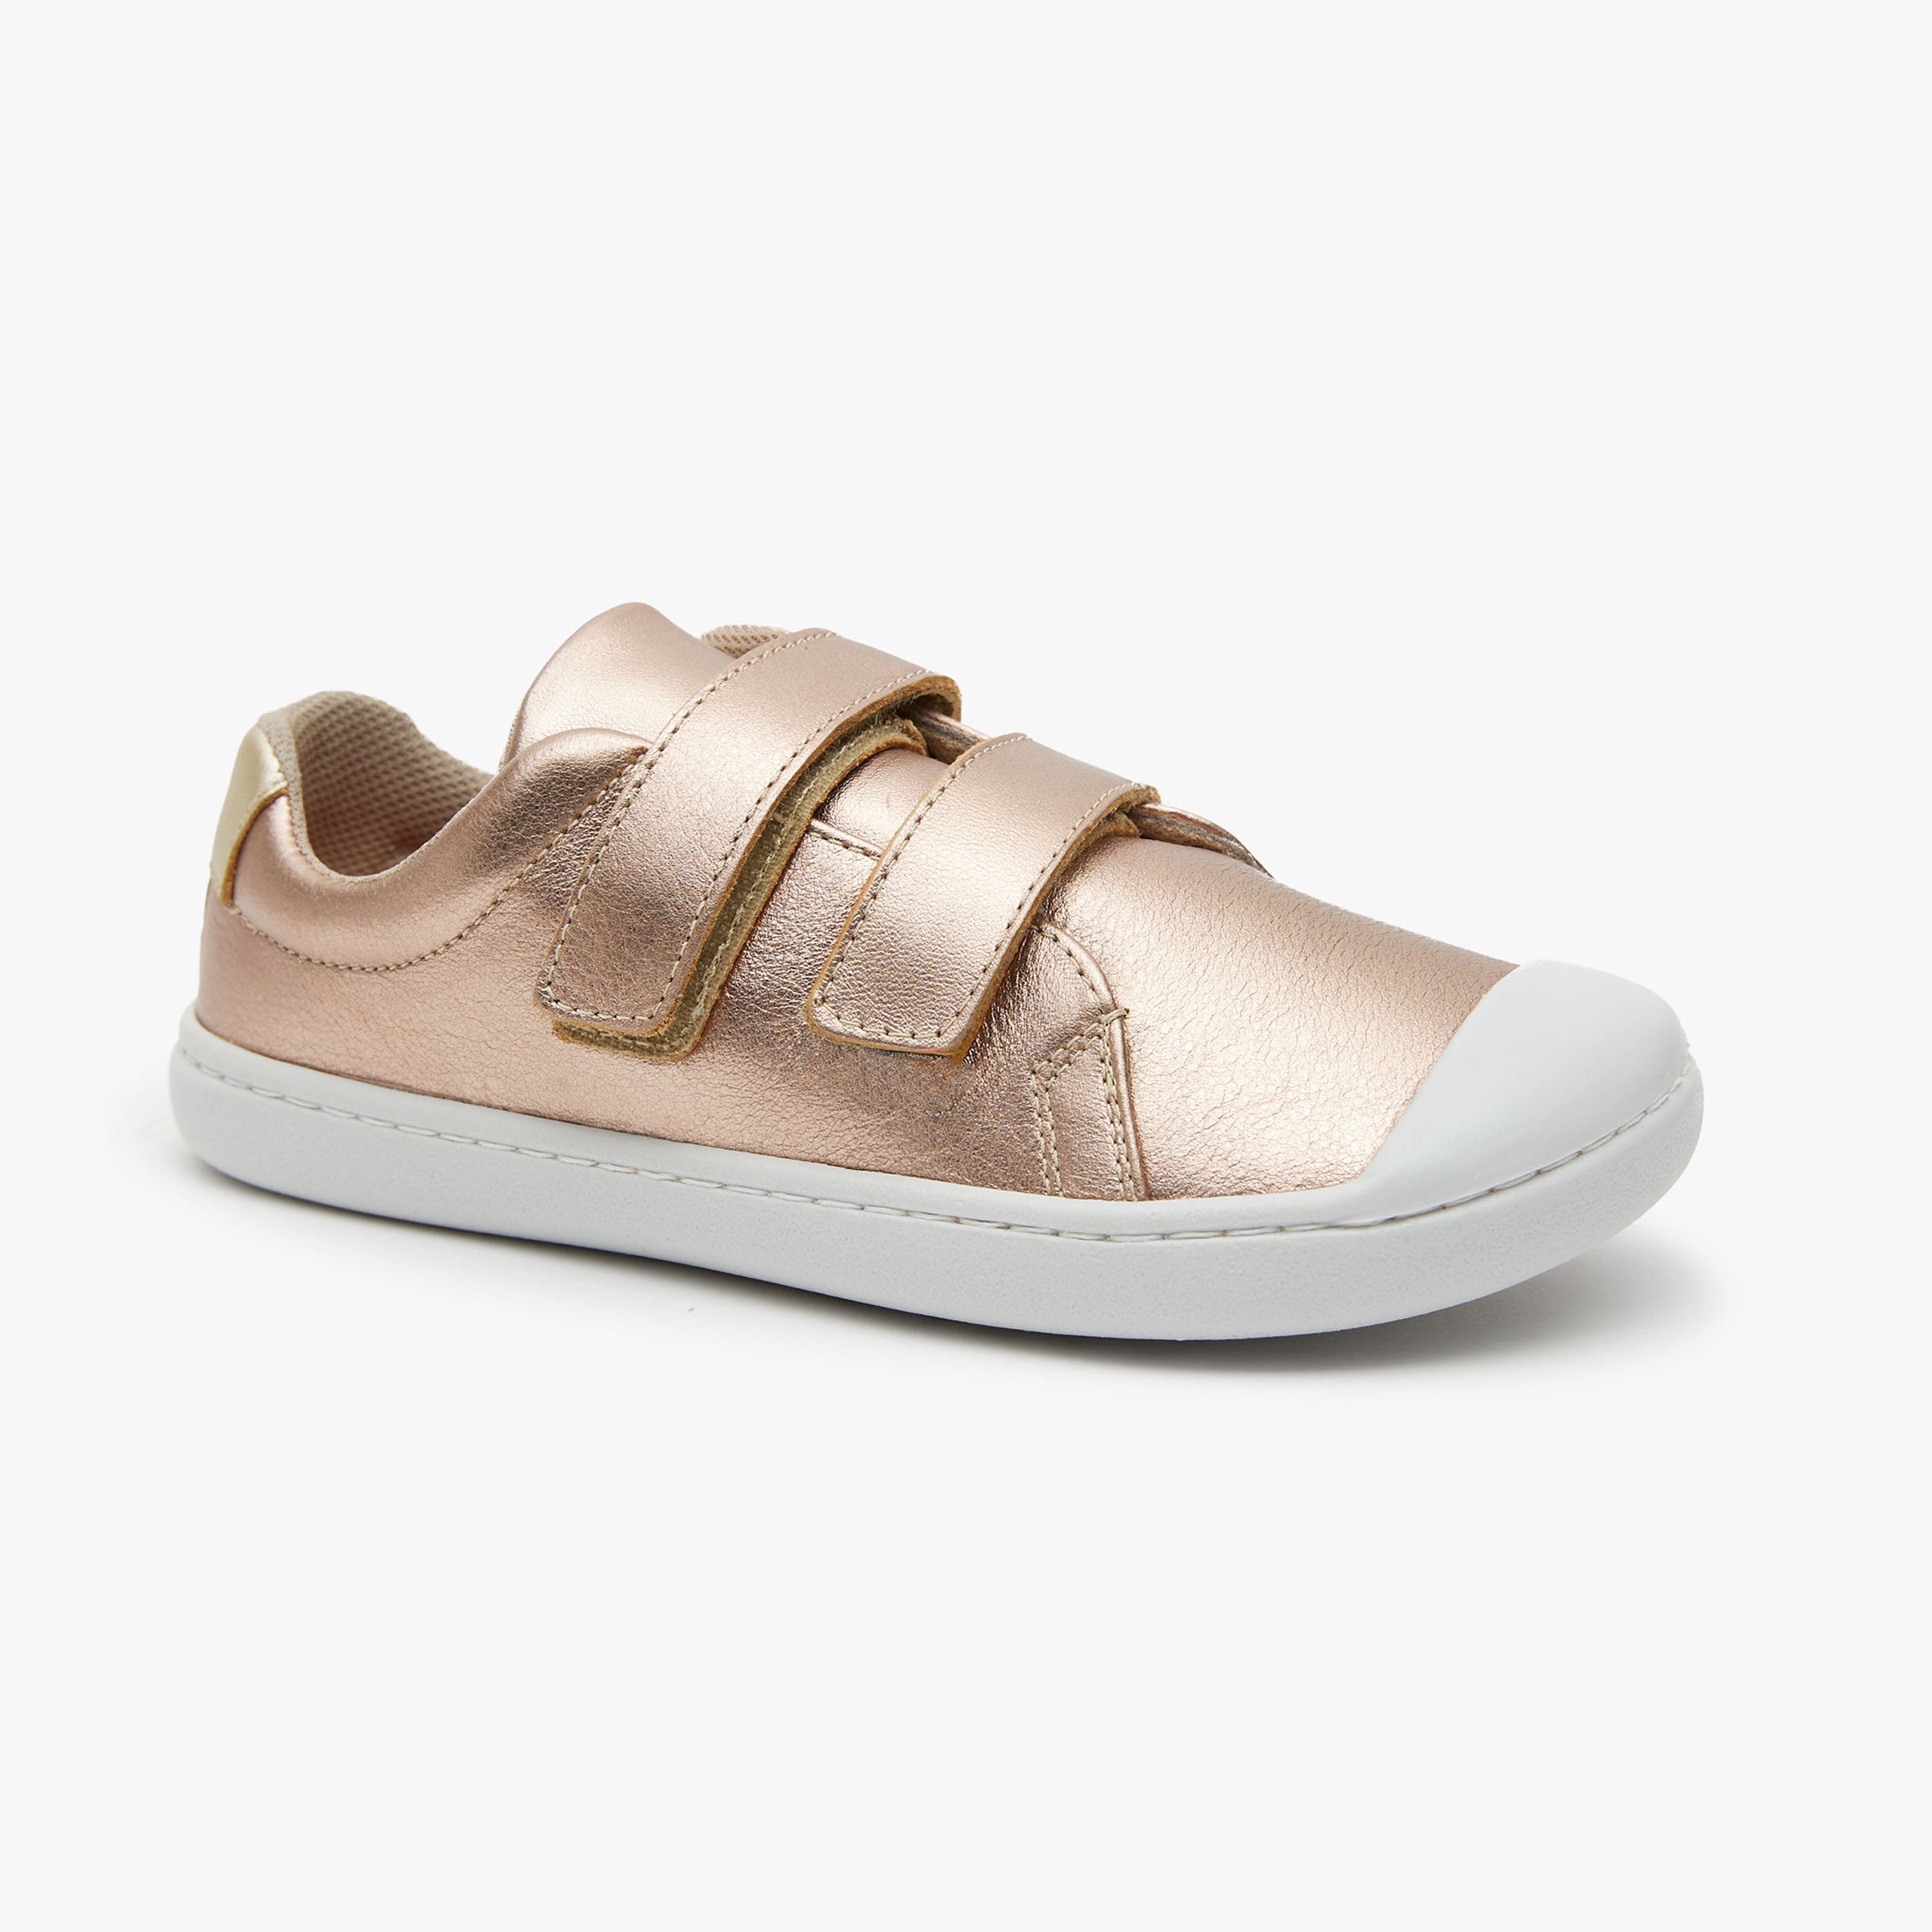 Vans Releases Rose Gold Shoes